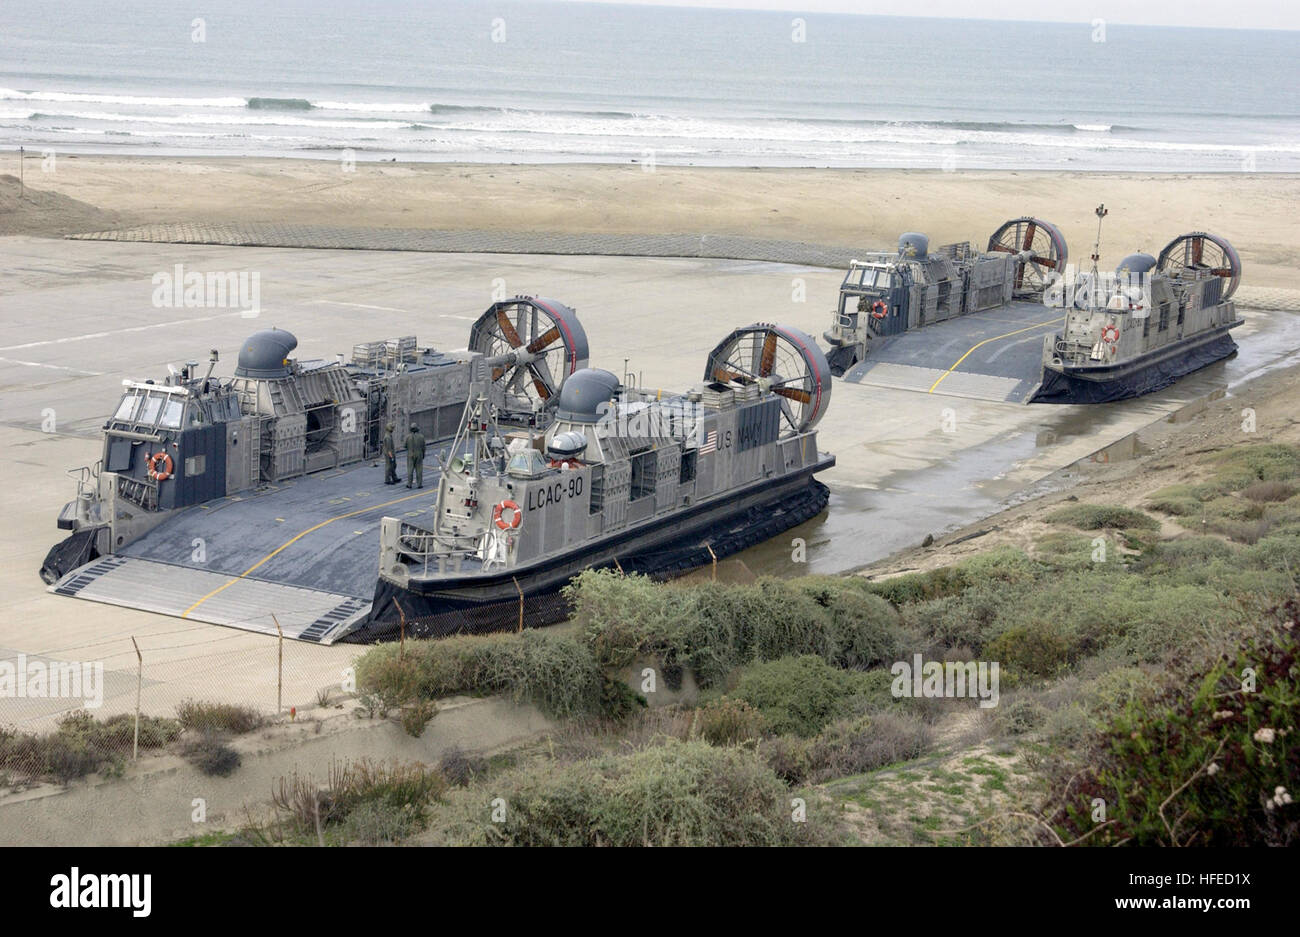 021211-N-5232L-002 Camp Pendleton, Calif. (Dec. 11, 2002) -- Two Landing Craft Air Cushions (LCAC) assigned to the 'Swift Intruders' of Assault Craft Unit Five (ACU-5) prepare for early morning exercises near Camp Pendleton Marine Corps Station.  LCAC's provide amphibious forces the speed and flexibility to land Marine units and heavy equipment on hostile shores.  U.S. Navy photo by PhotographerÕs Mate Airman Jason D. Landon.  (RELEASED) US Navy 021211-N-5232L-002 LCAC's prepare for early morning exercises Stock Photo